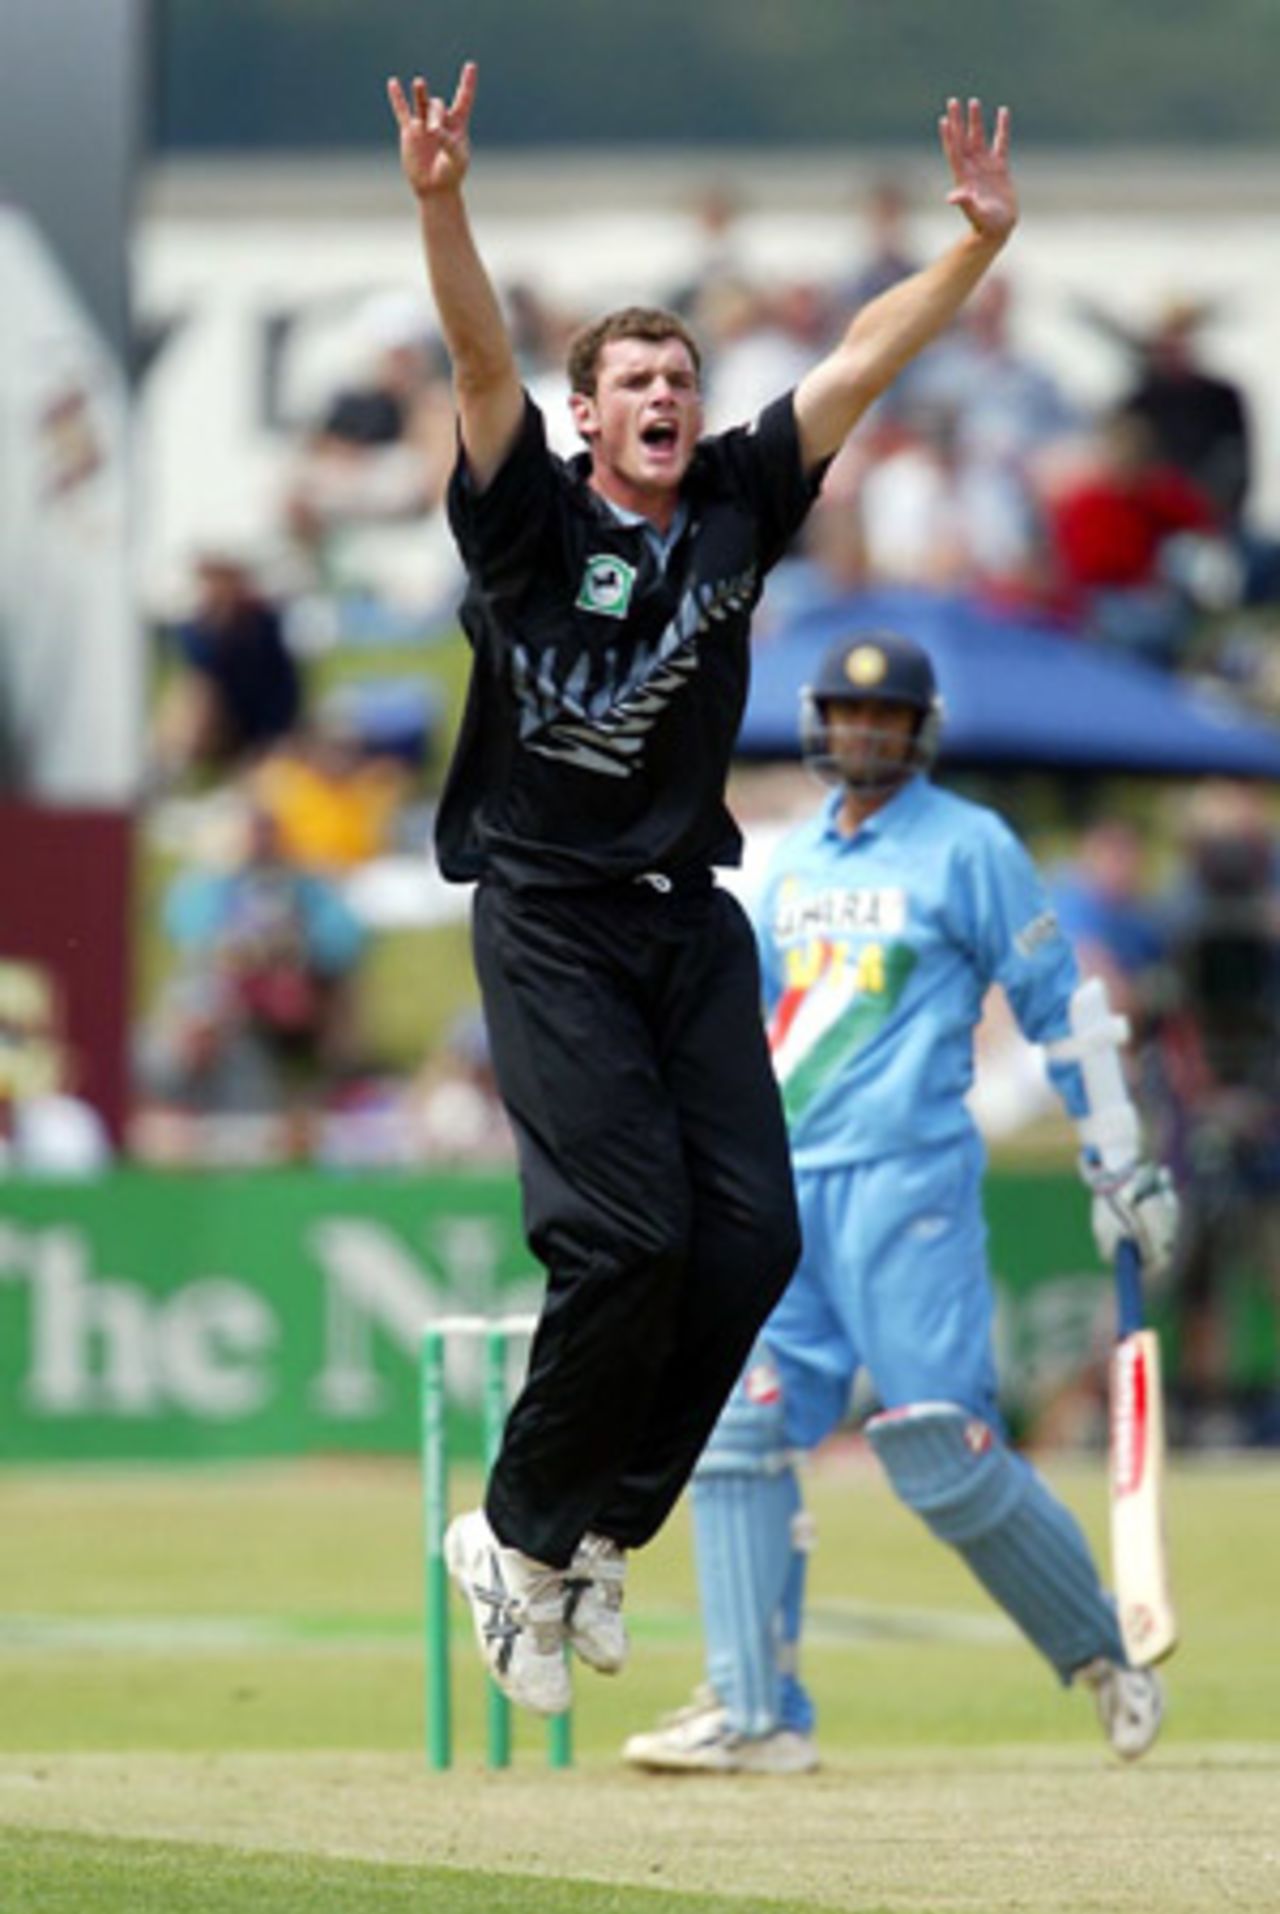 New Zealand bowler Kyle Mills unsuccessfully appeals for lbw against Indian batsman Rahul Dravid during his spell of 1-28 from 10 overs. 4th ODI: New Zealand v India at John Davies Oval, Queenstown, 4 January 2003.